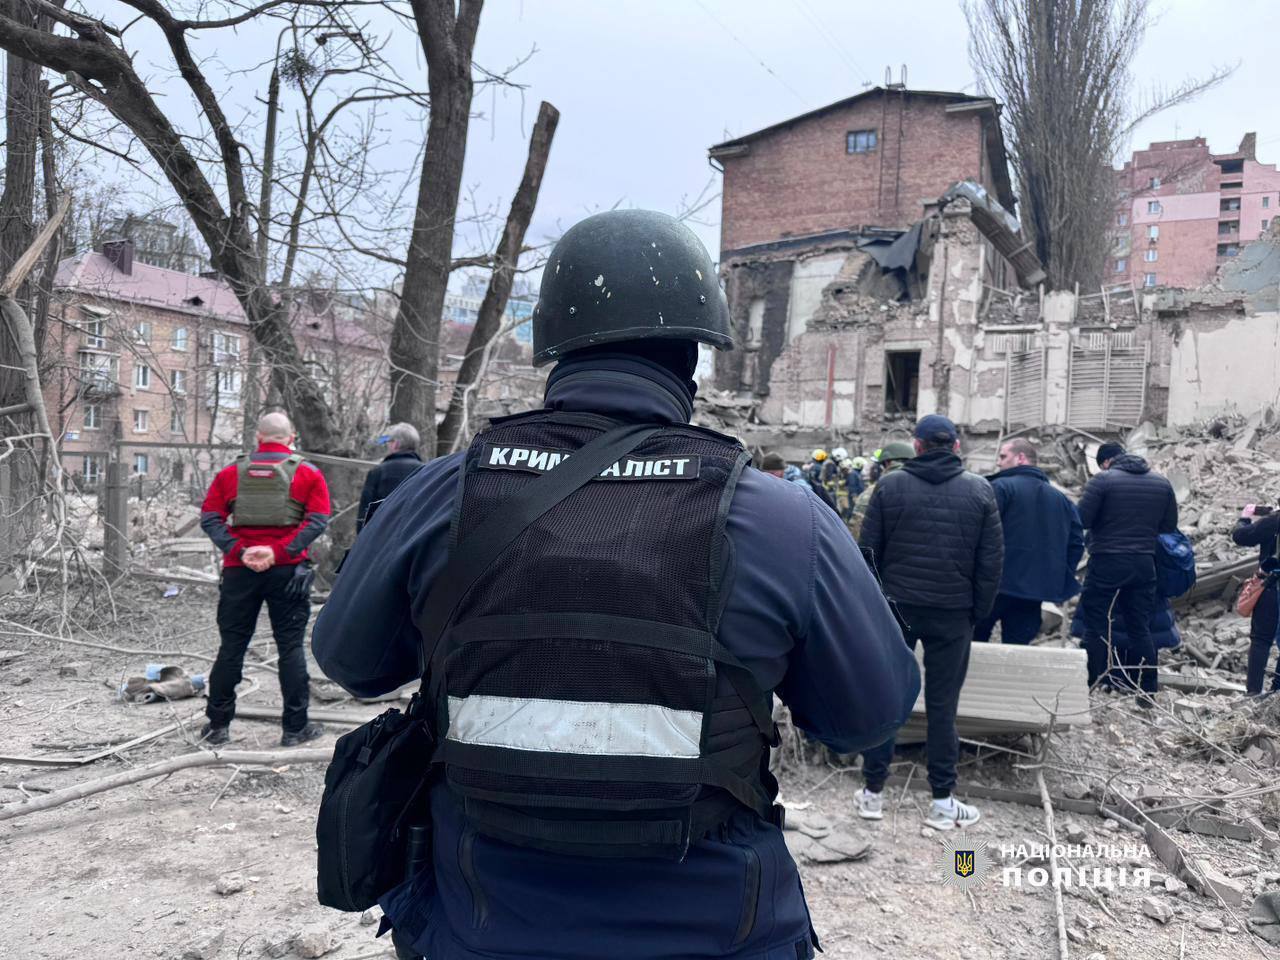 A gym of a school was destroyed and the road was covered with bricks: the consequences of a rocket attack in the Pechersk district of Kyiv. Photo